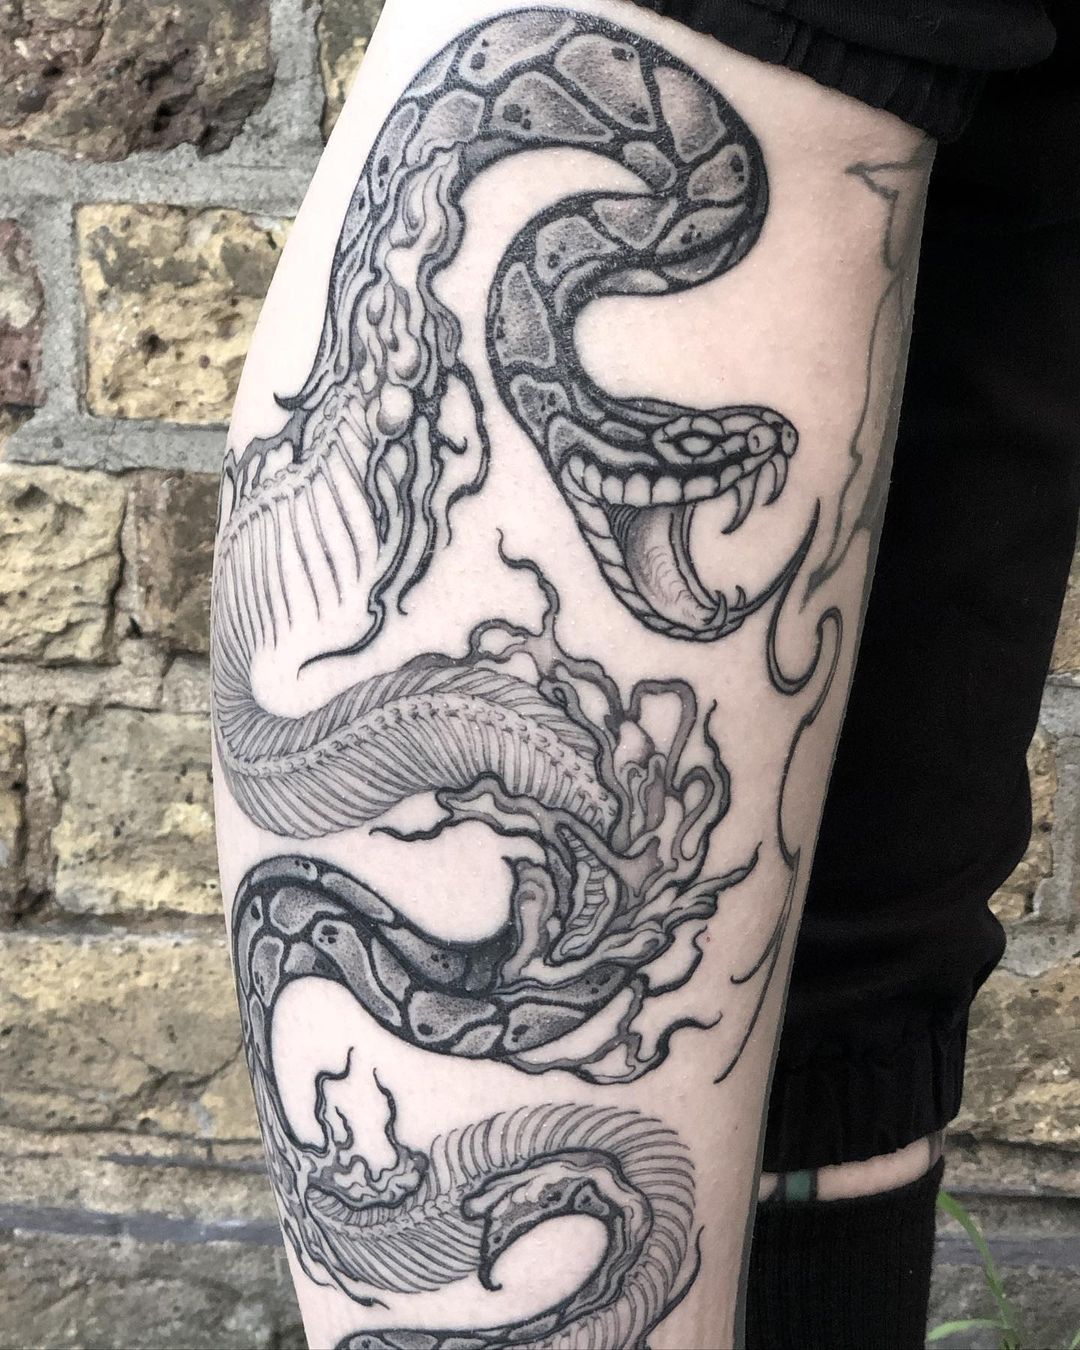 Finished Megans snake thigh today Thanks for